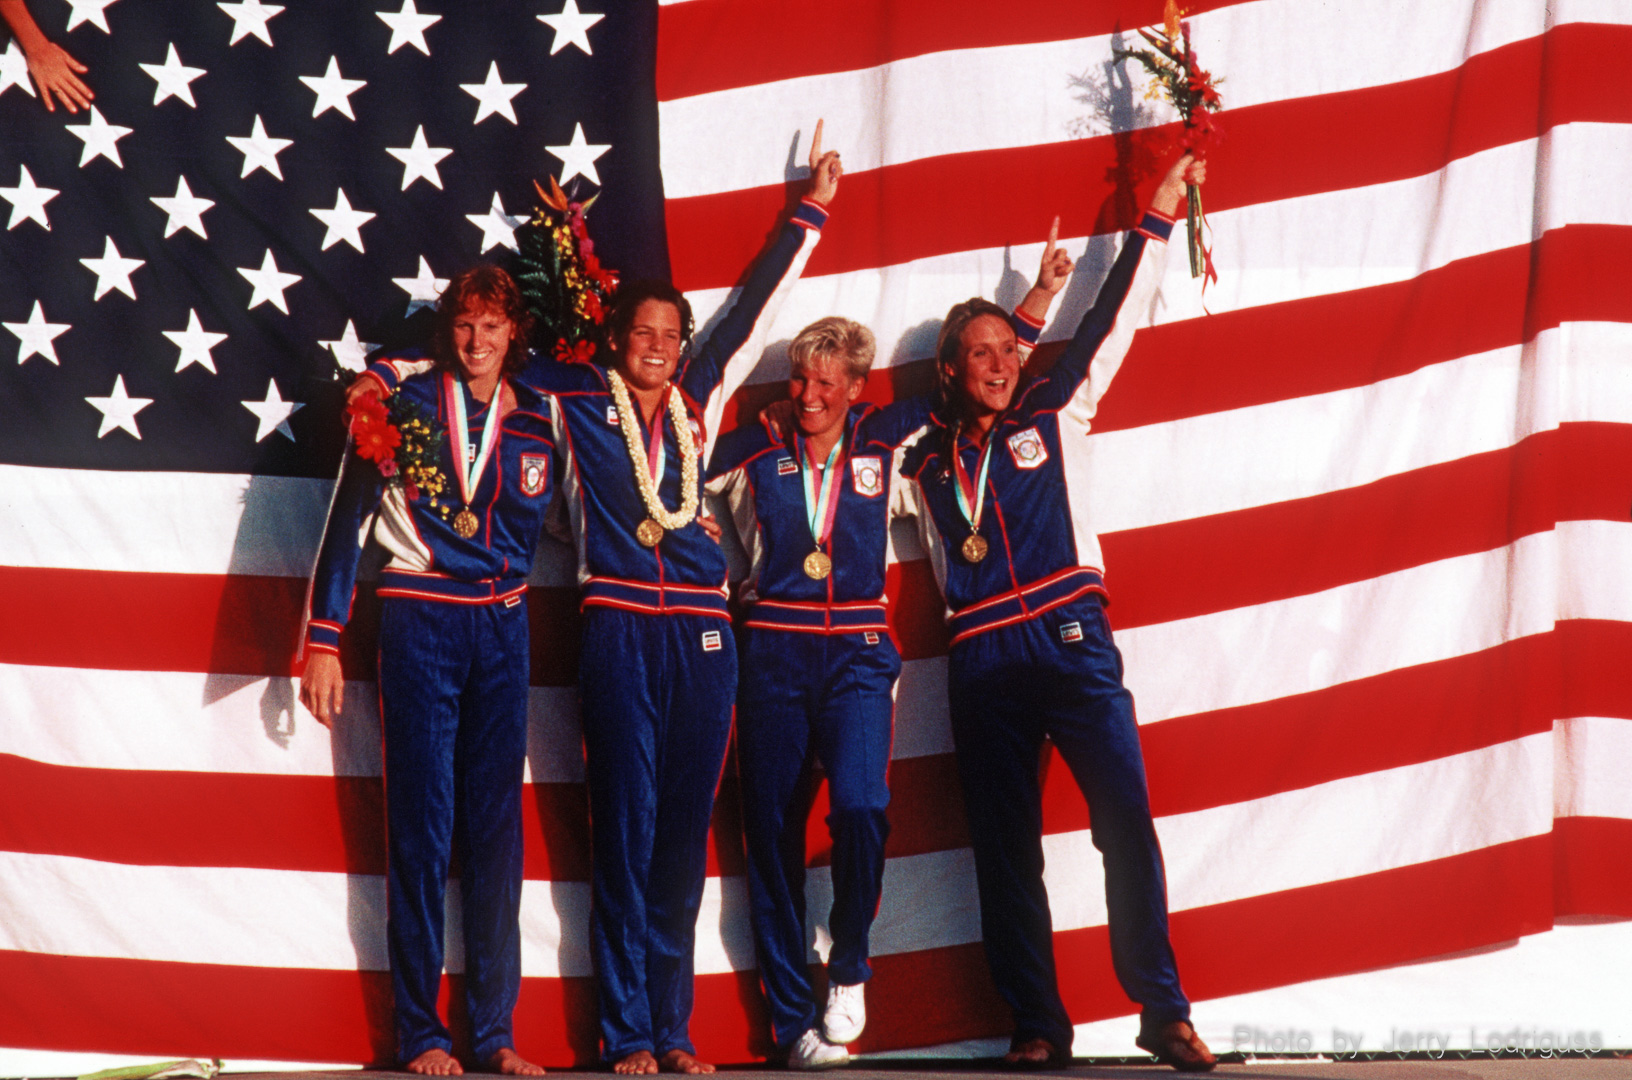 Teammates in the USA women's 4 x 100 meter relay stop in front of a giant American flag to wave to fans after winning the gold medal and setting a world record in the finals of the event during the 1984 Olympics in Los Angeles.